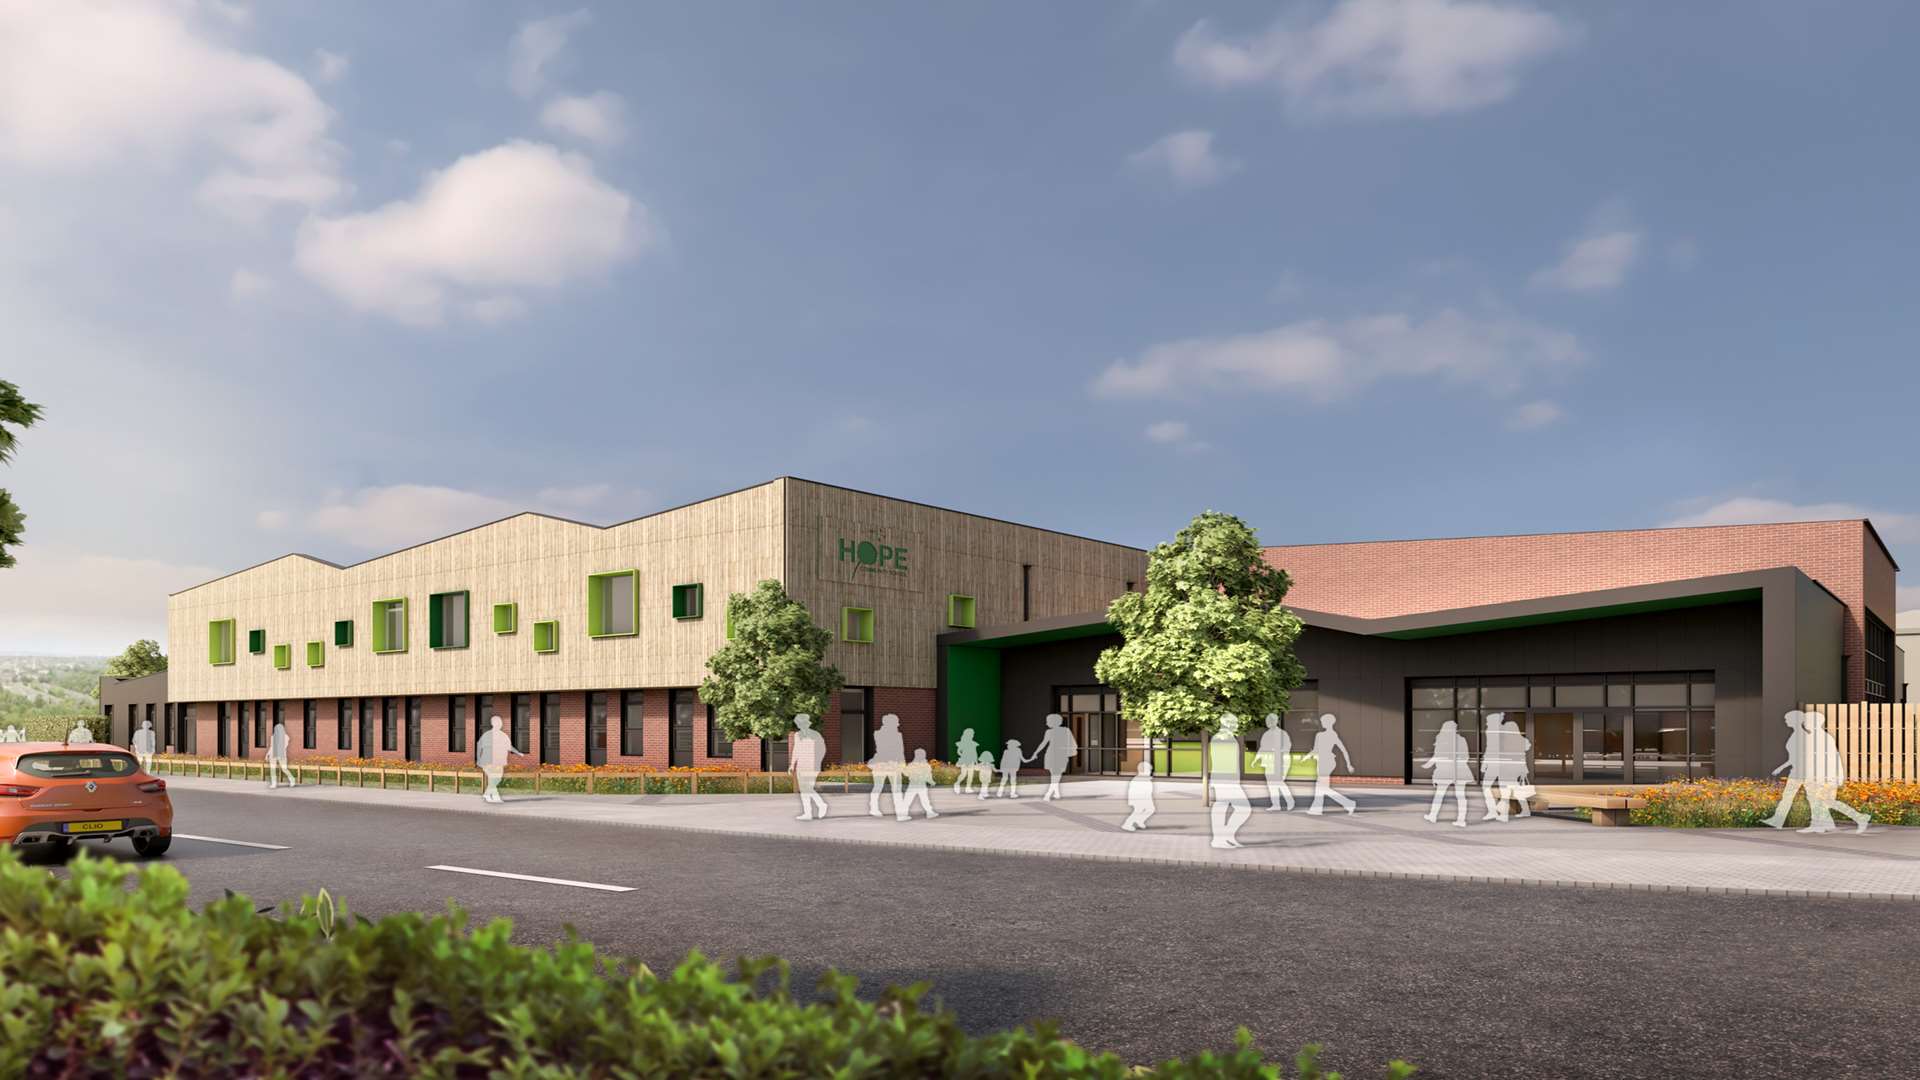 How the Hope Community School will look